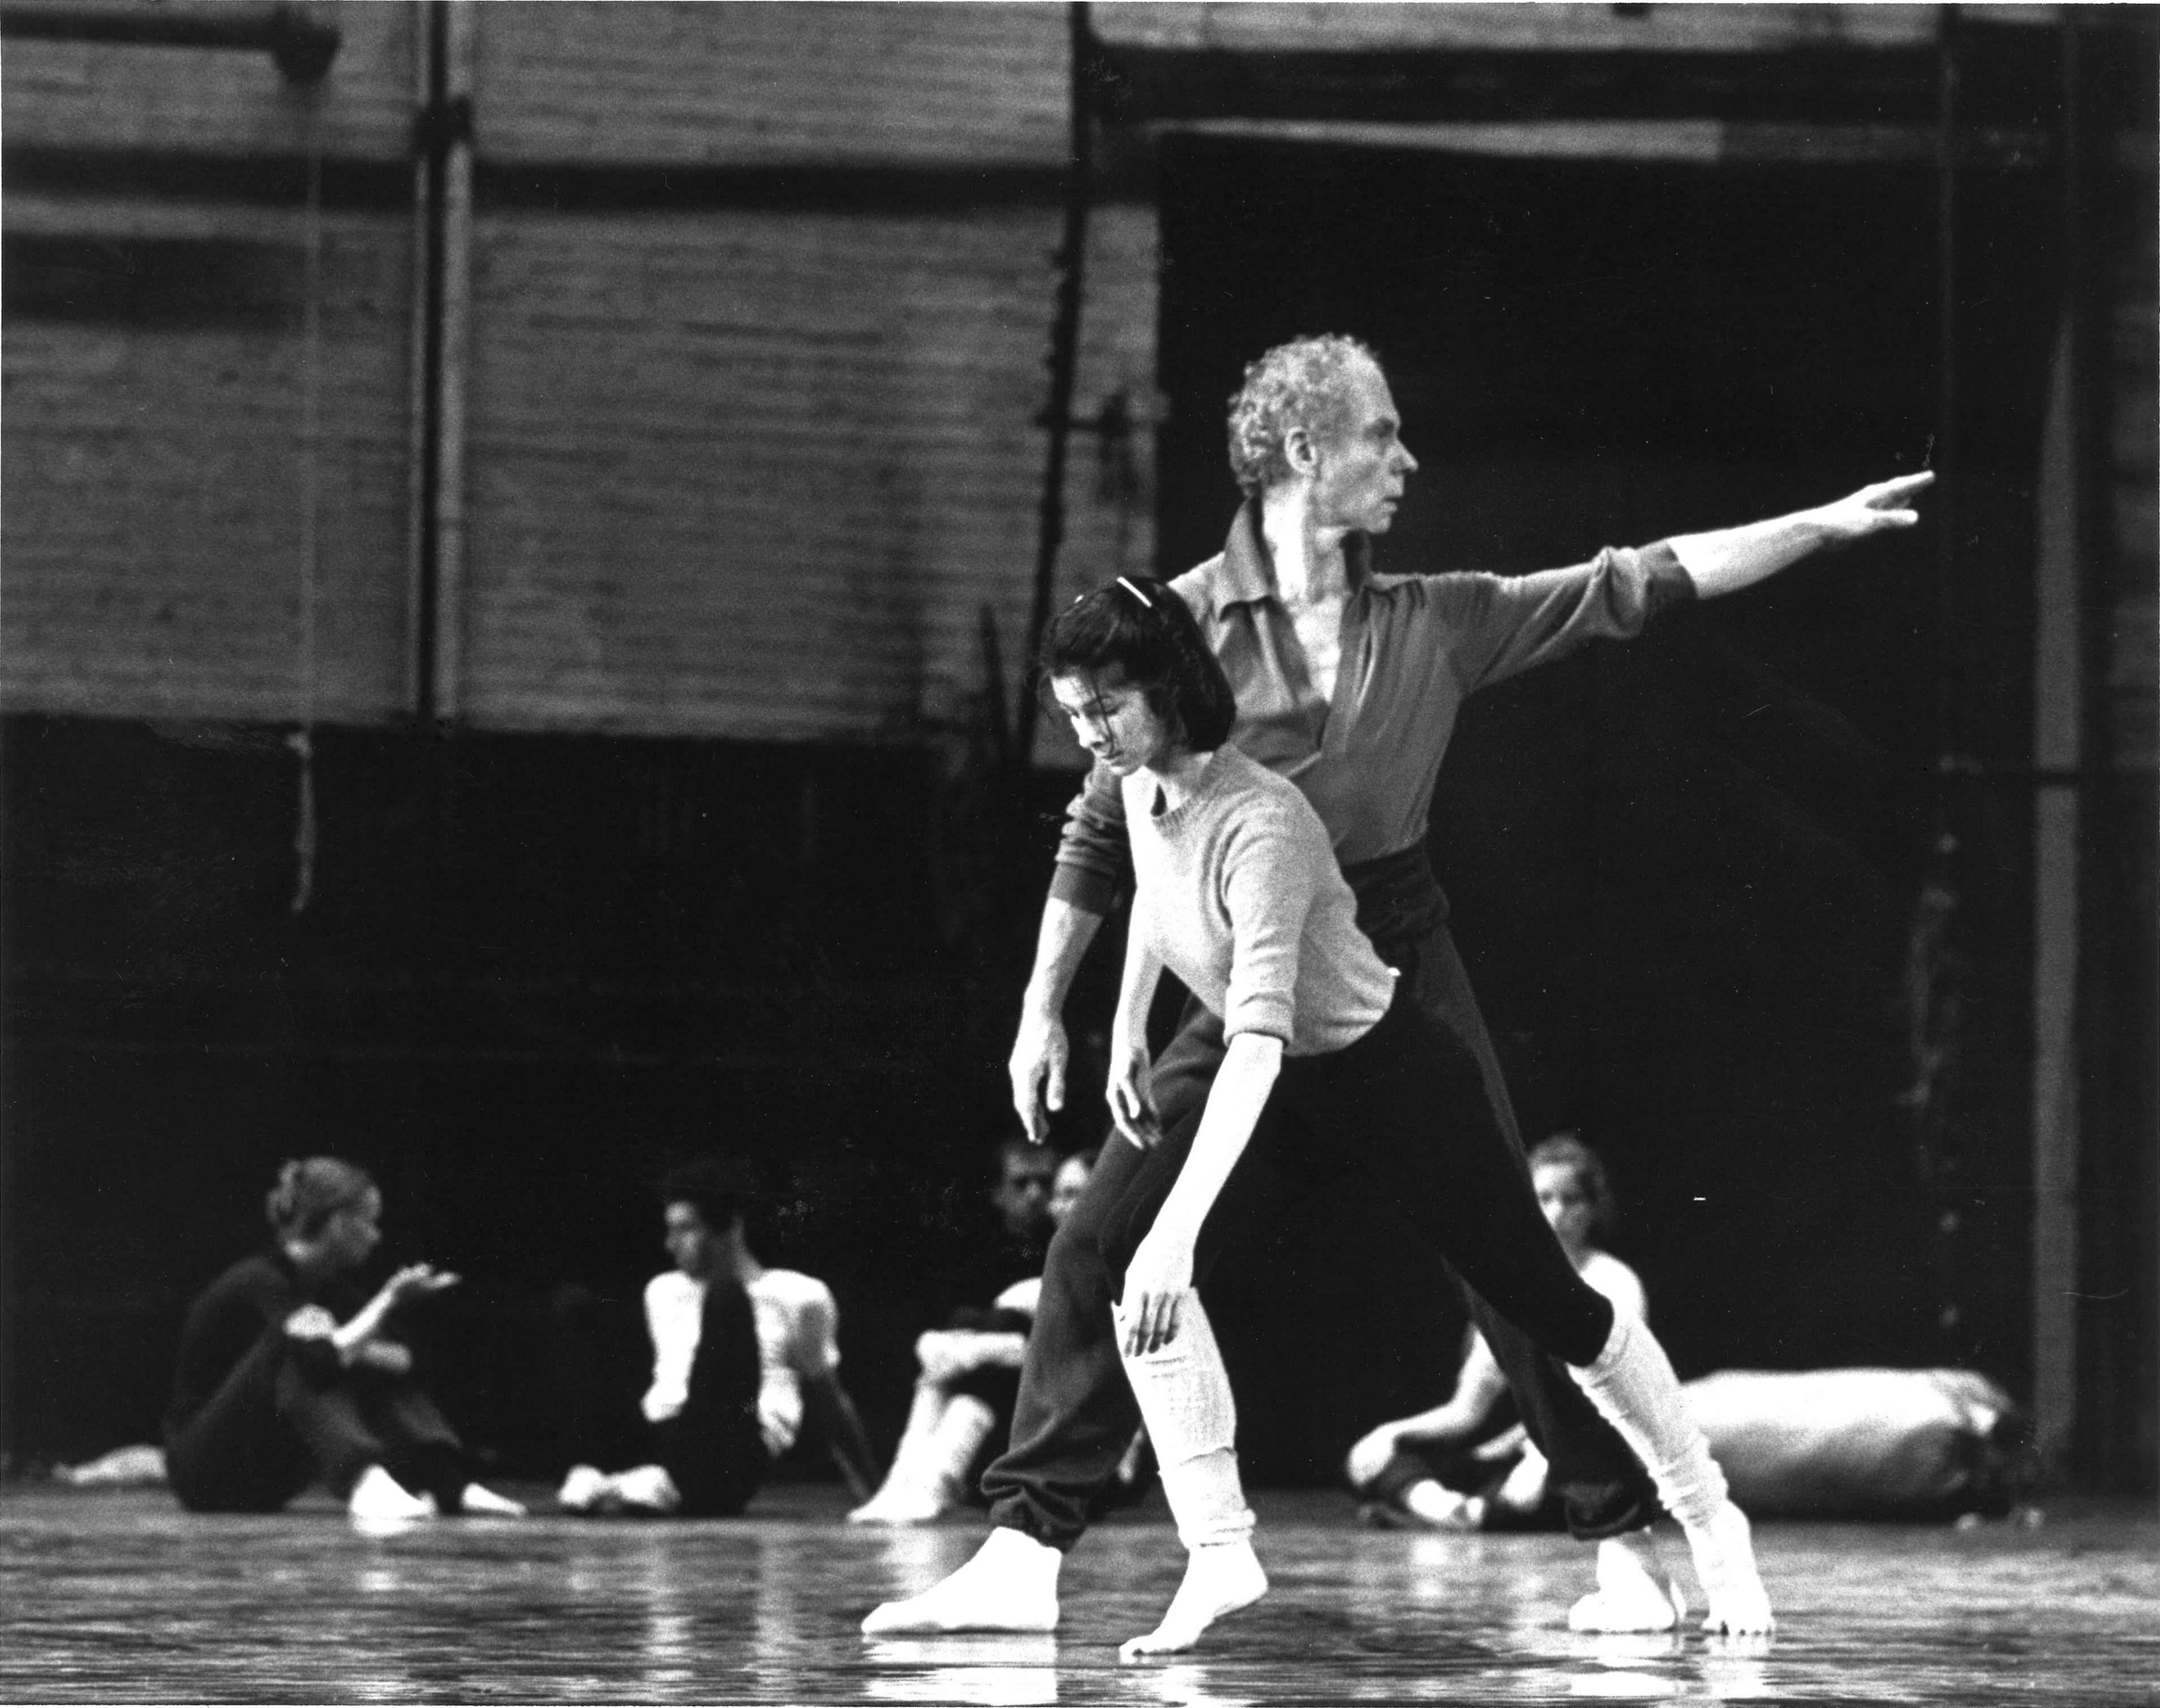 Catherine Kerr gazes down as she balances in a forced arch lunge; Merce Cunningham, just behind her, mirrors her lunge while looking over his back shoulder. Out of focus in the background are seated dancers, chatting and watching. All wear rehearsal clothes.